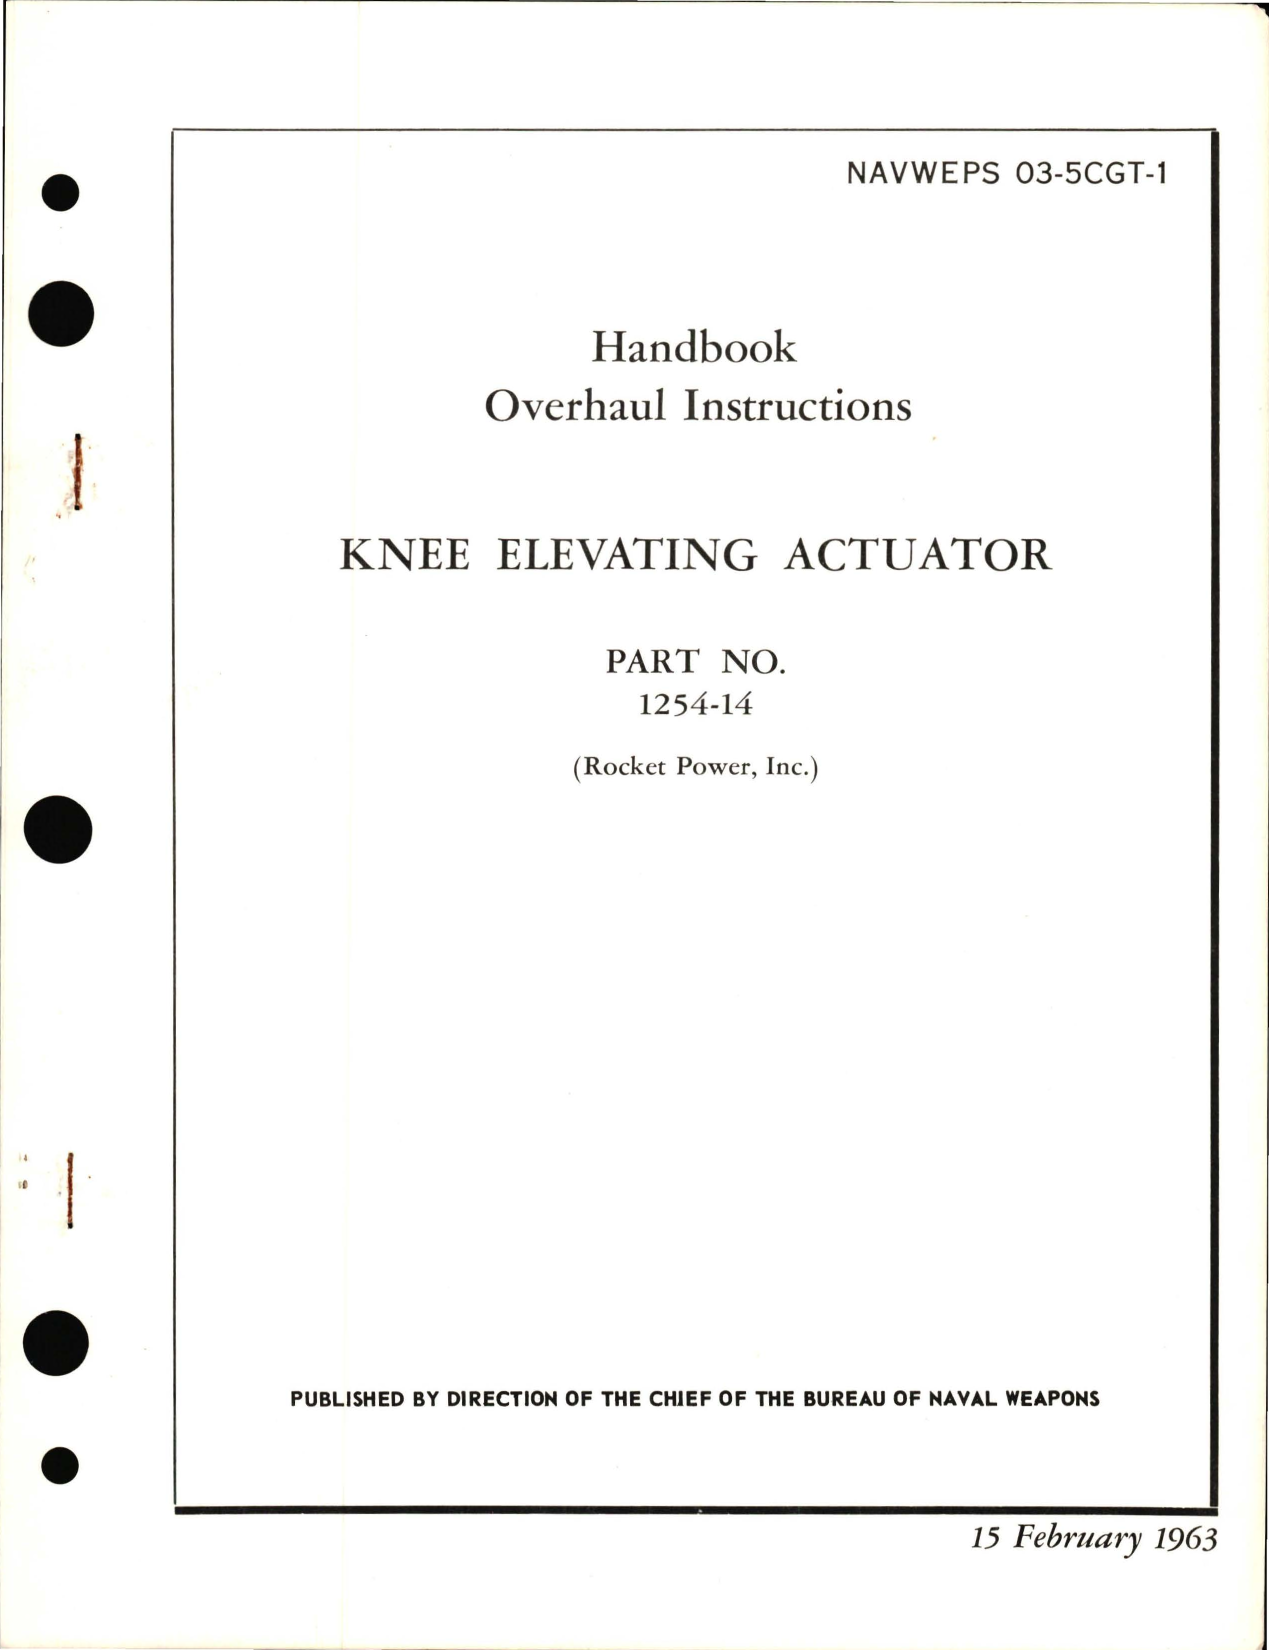 Sample page 1 from AirCorps Library document: Overhaul Instructions for Knee Elevating Actuator - Part 1254-14 